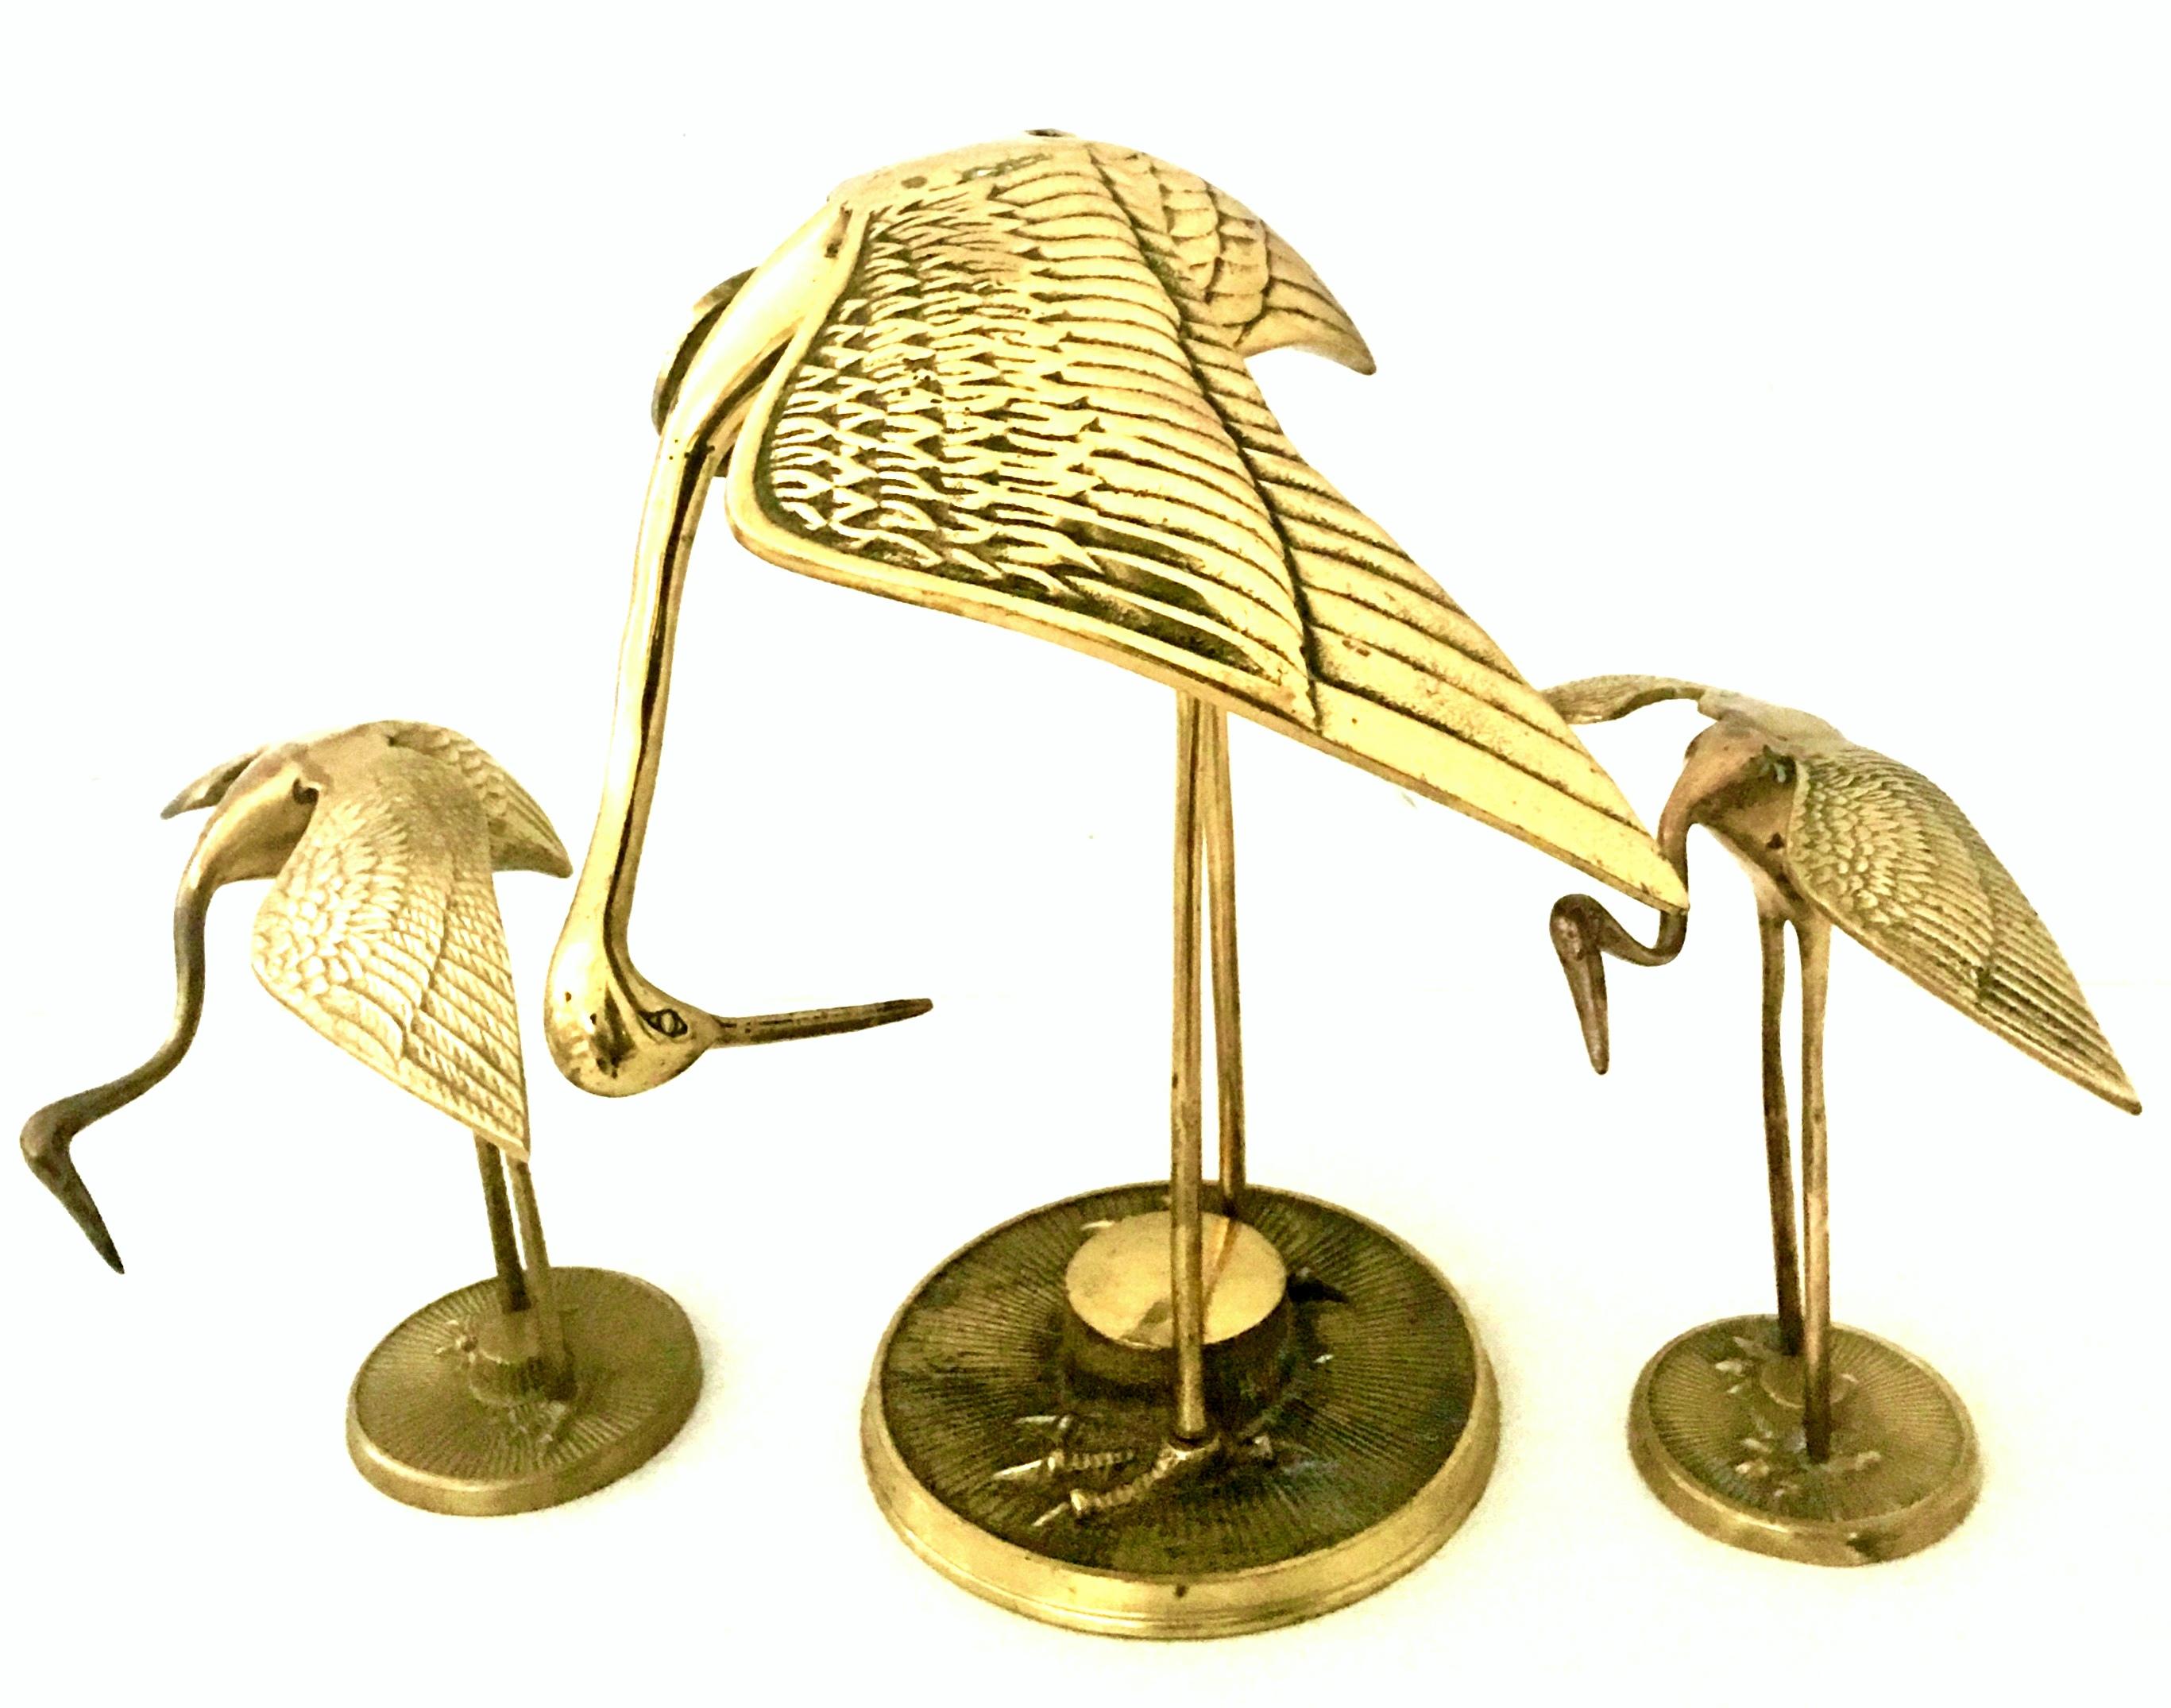 20th Century solid brass set of three crane birds of variable heights.
Dimensions:
Large 12